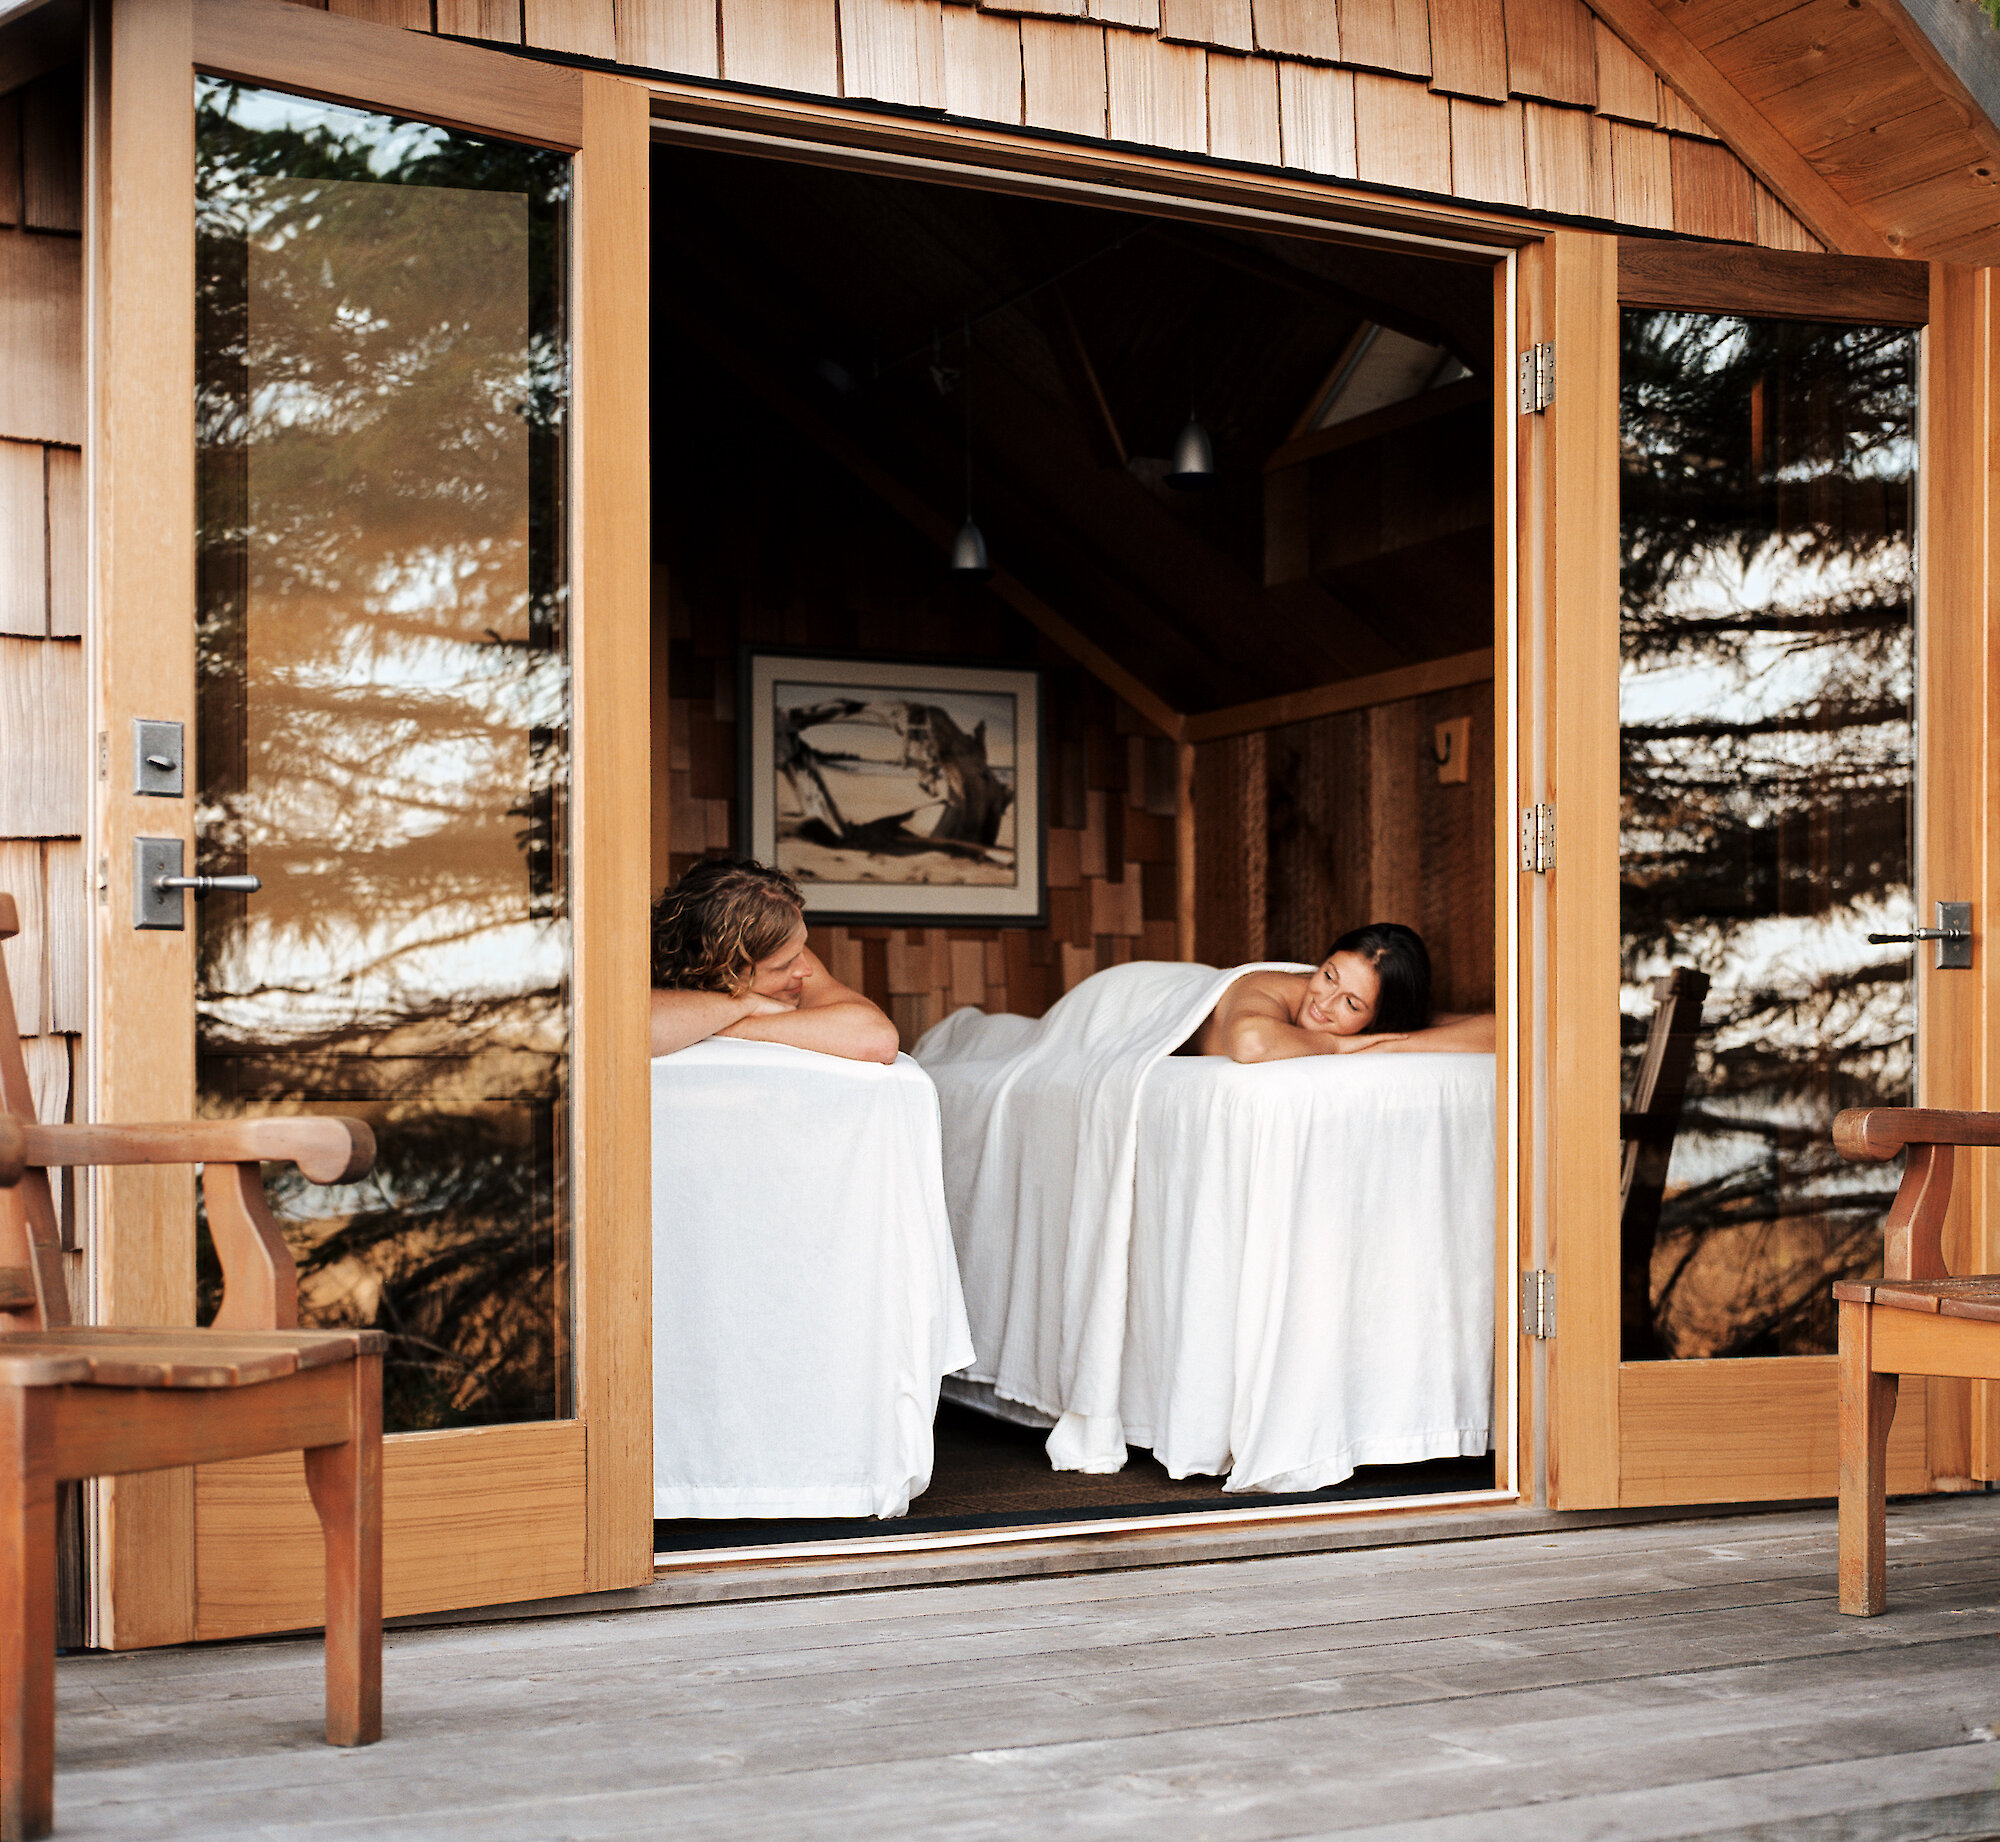 Couples massage in a hut with the doors open to the outdoors